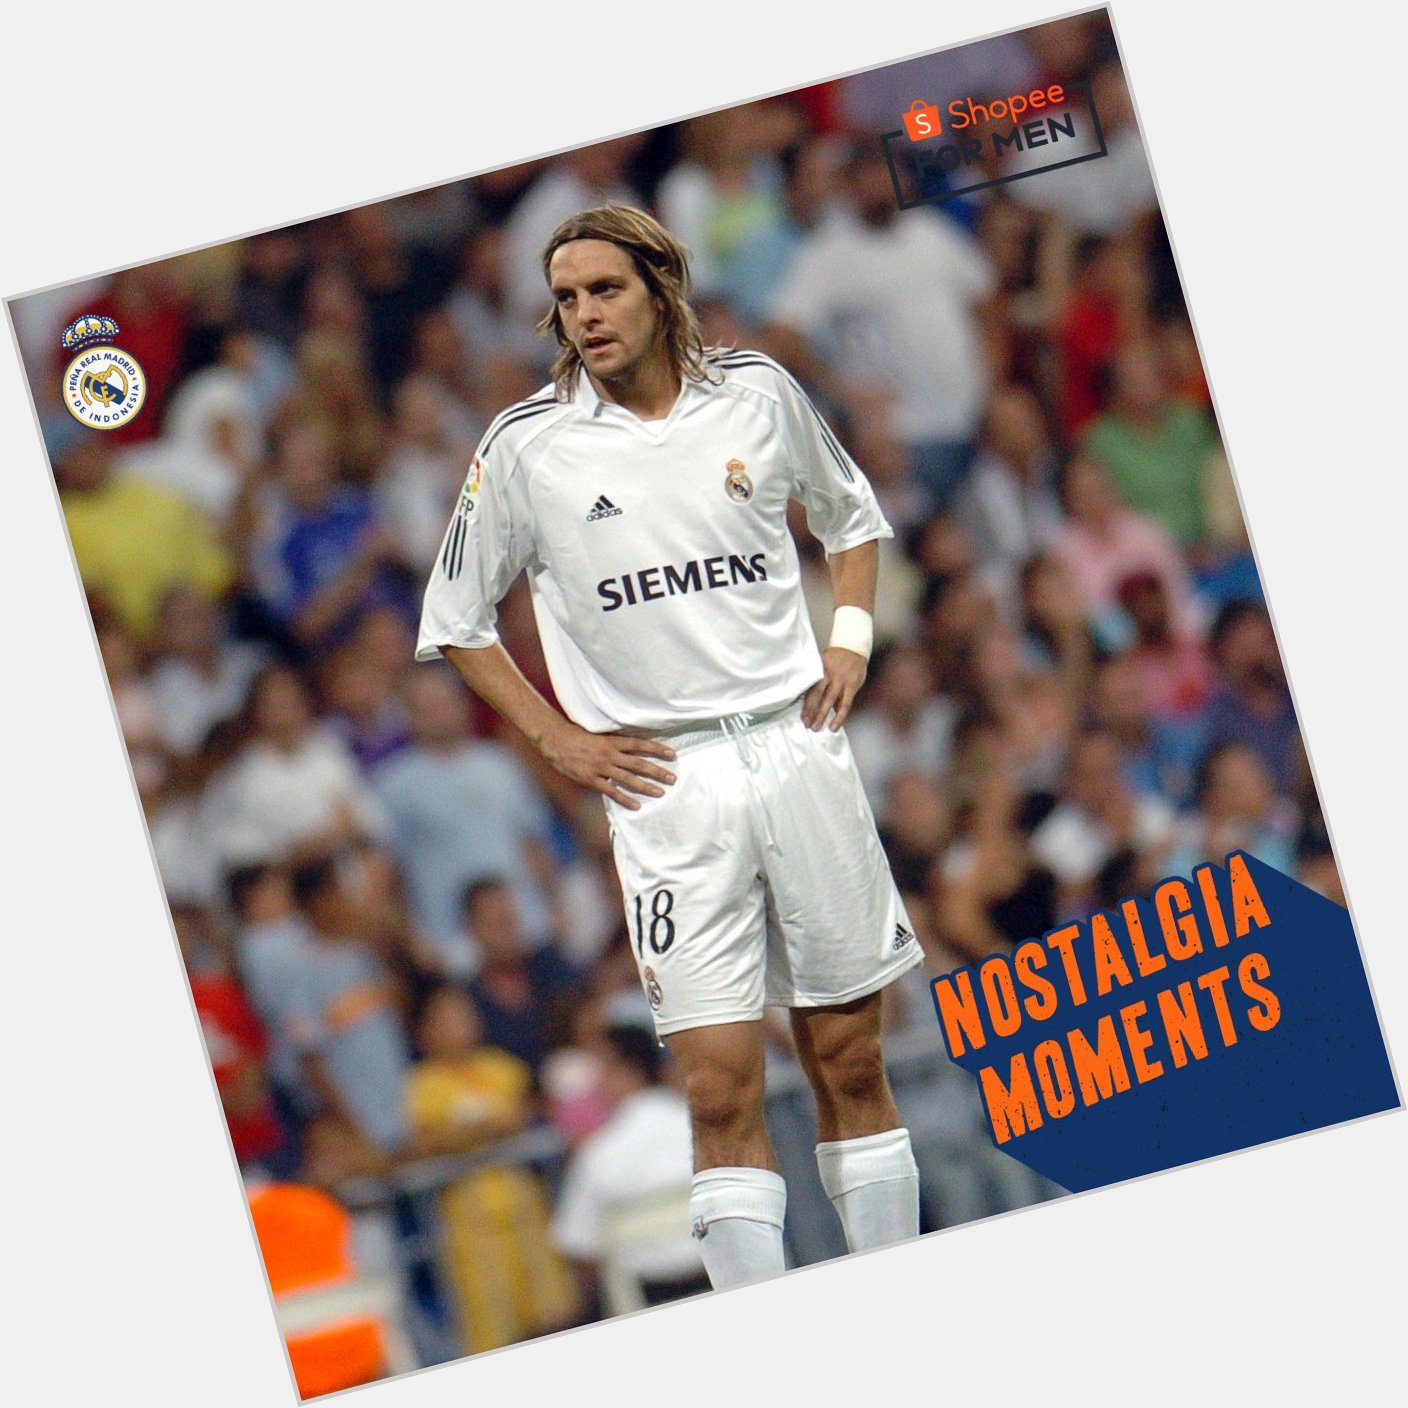 Happy birthday Jonathan Woodgate! Wish you all the best, from Indonesia!    